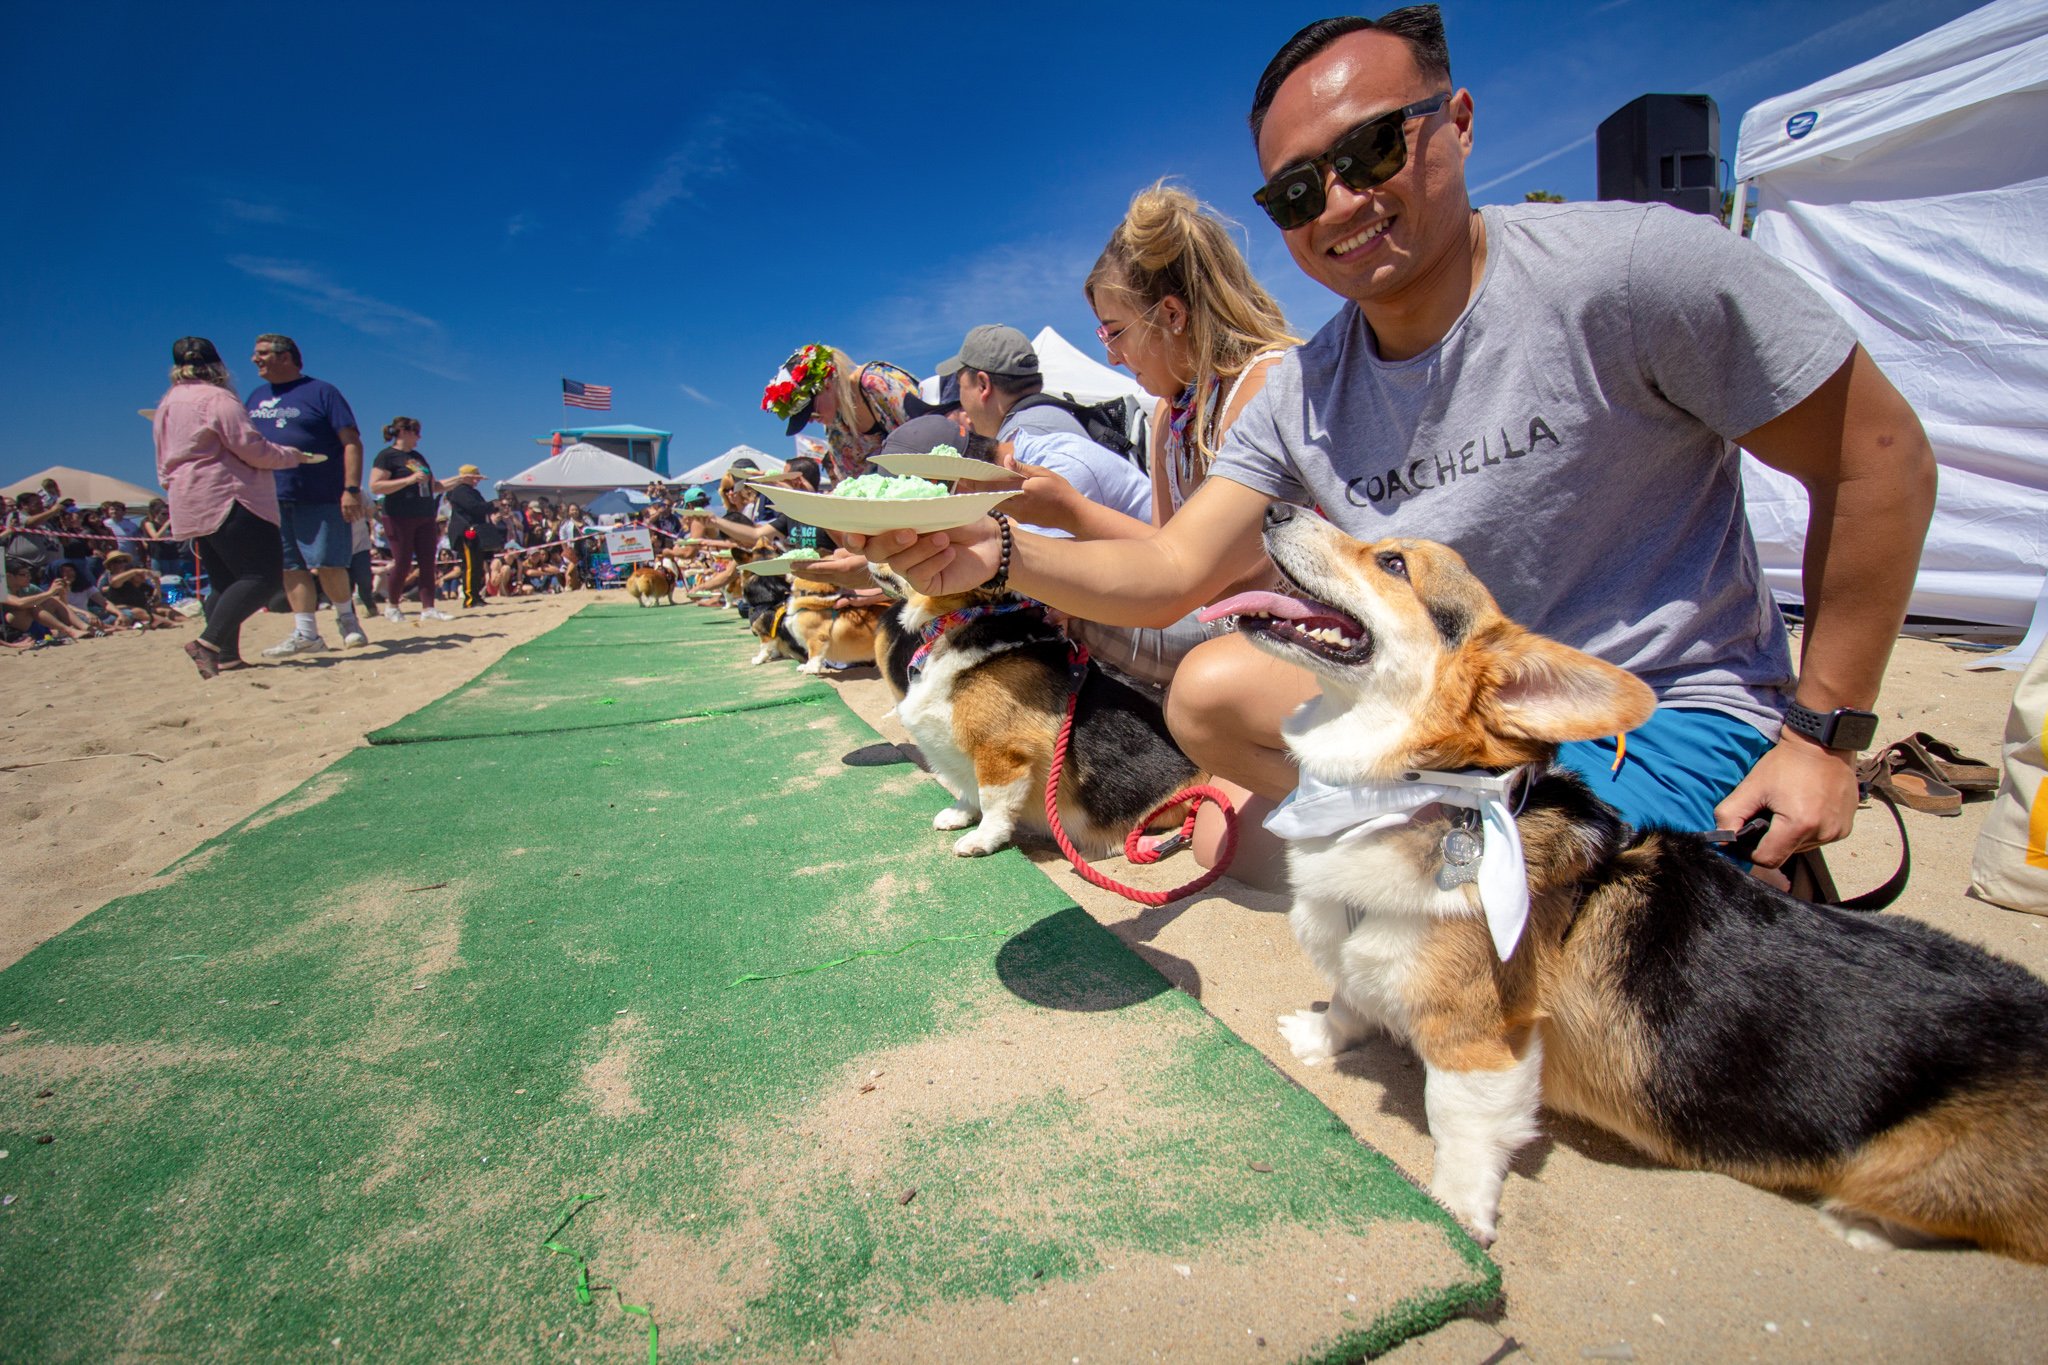 Orange County Pet and Dog Photography - by Steamer Lee - Corgi Beach Day Spring 2019 - Southern Caliornia 11.JPG